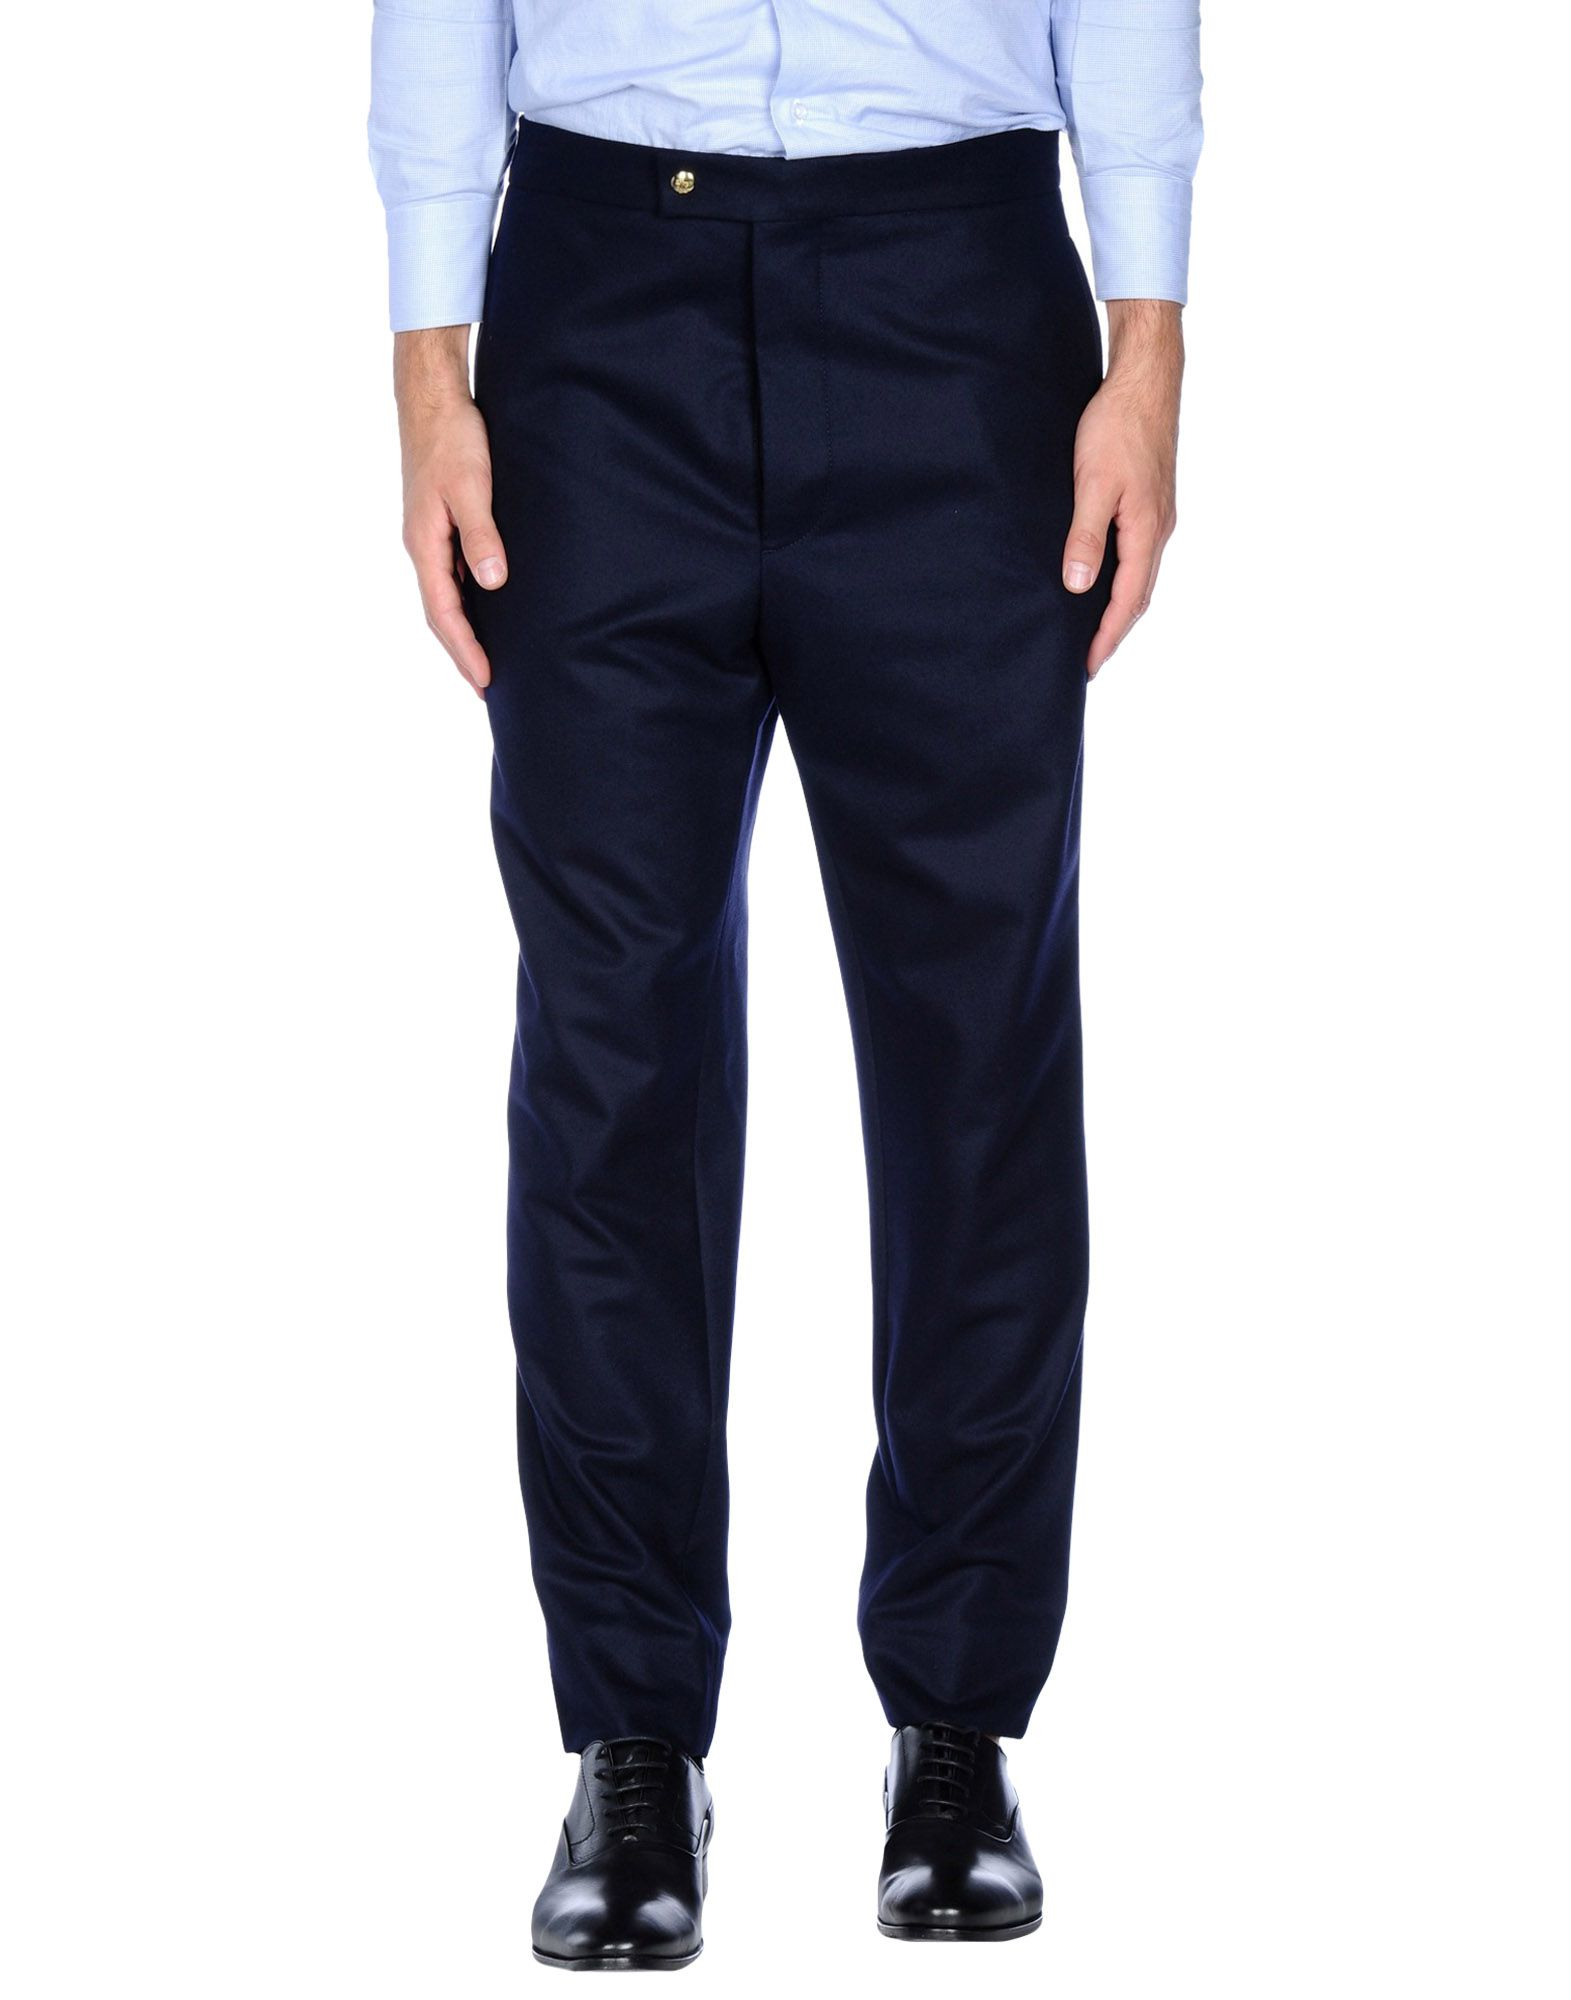 Lyst - Moncler Casual Trouser in Blue for Men